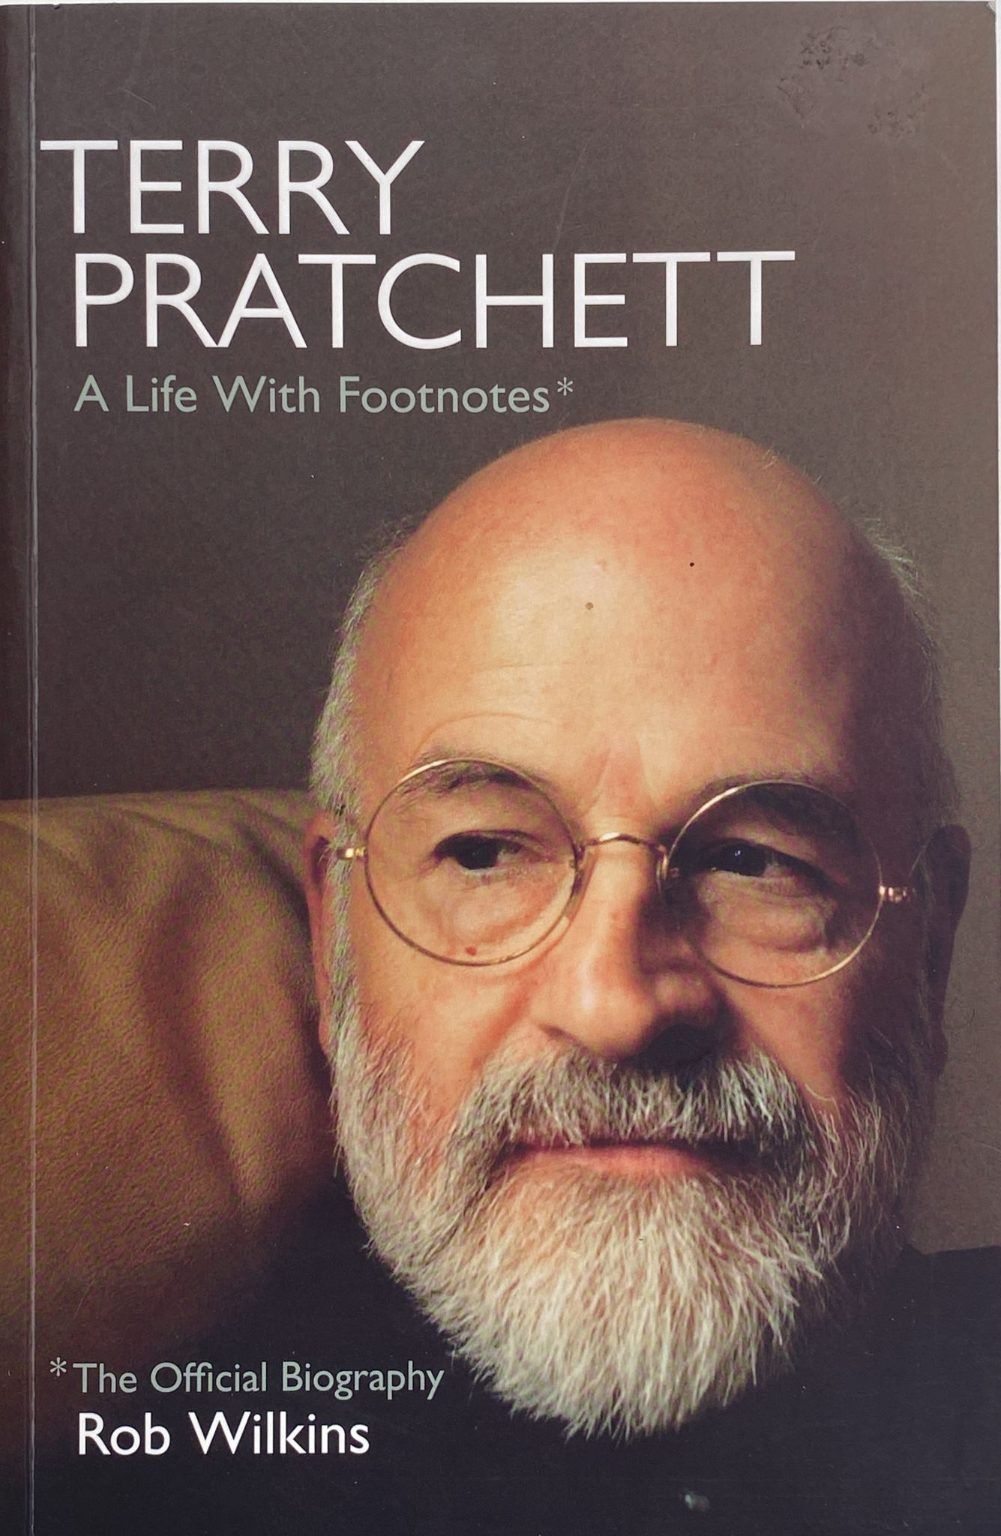 TERRY PRATCHETT: A Life With Footnotes, The Official Biography